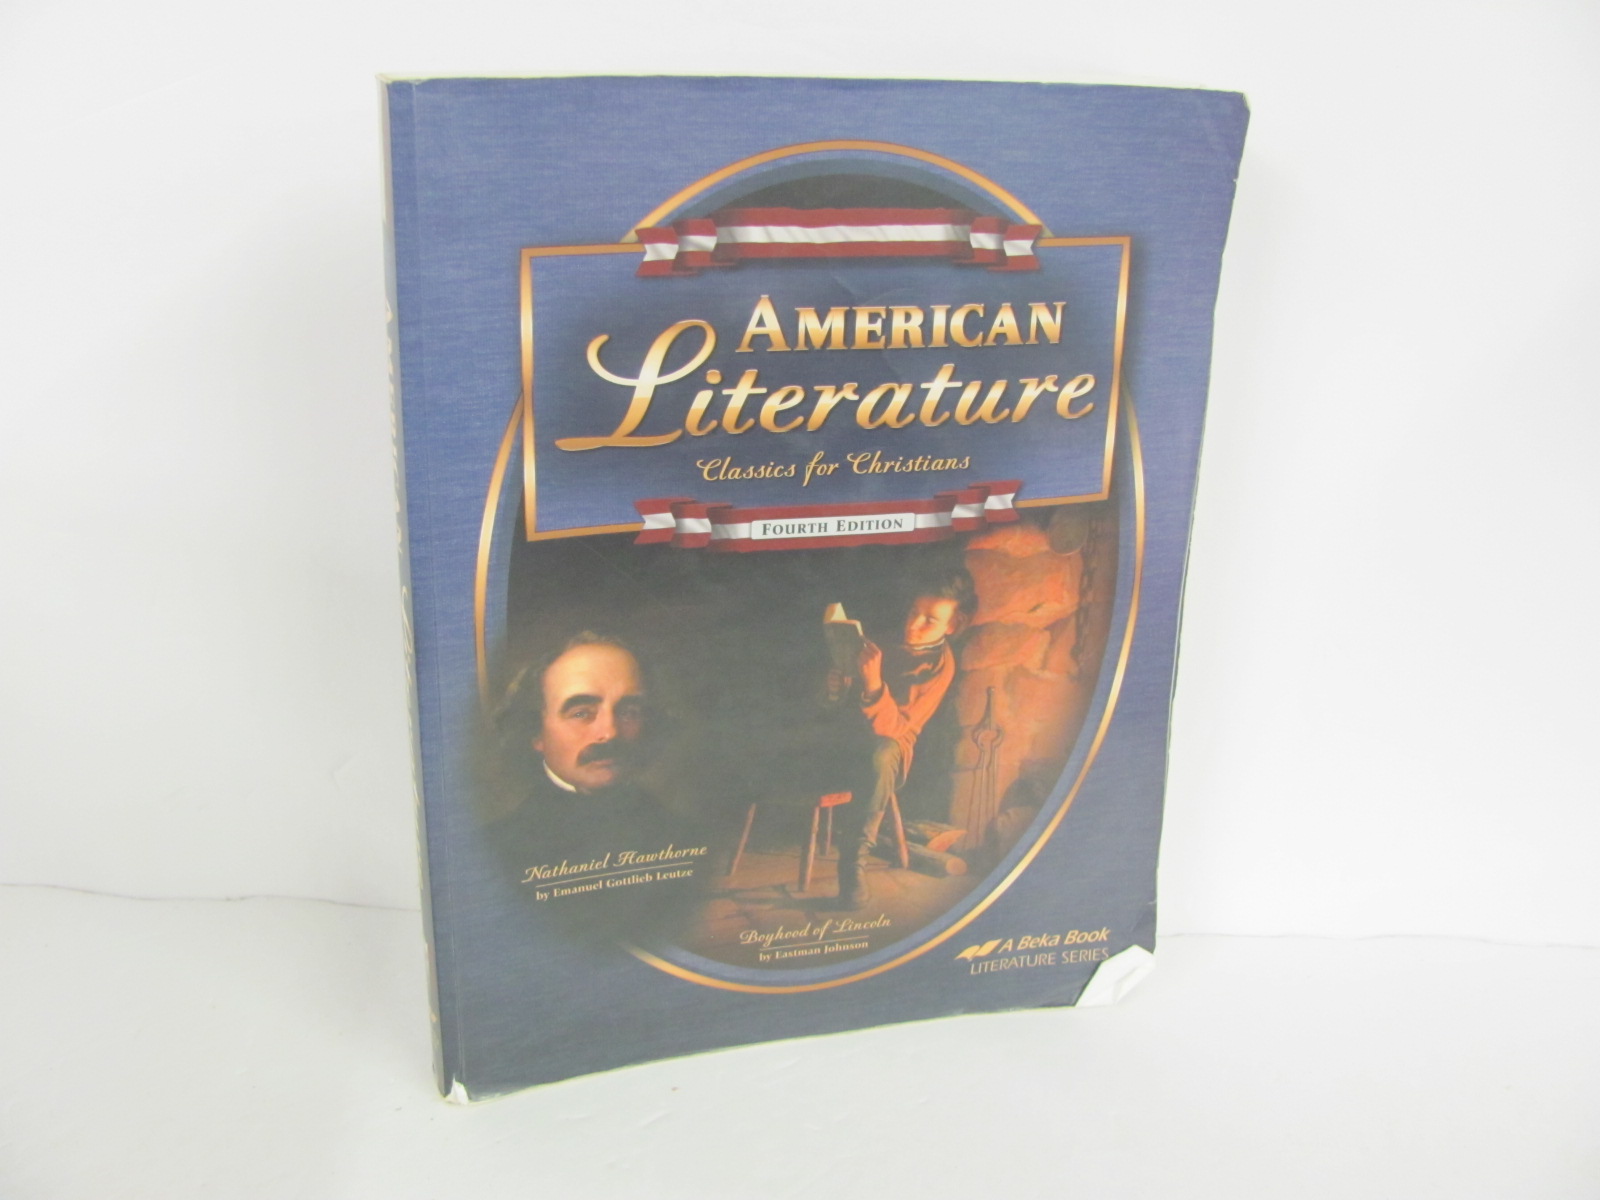 American-Literature-Abeka-Student-Book-Used-4th-Edition-Literature-Literature_334963A.jpg